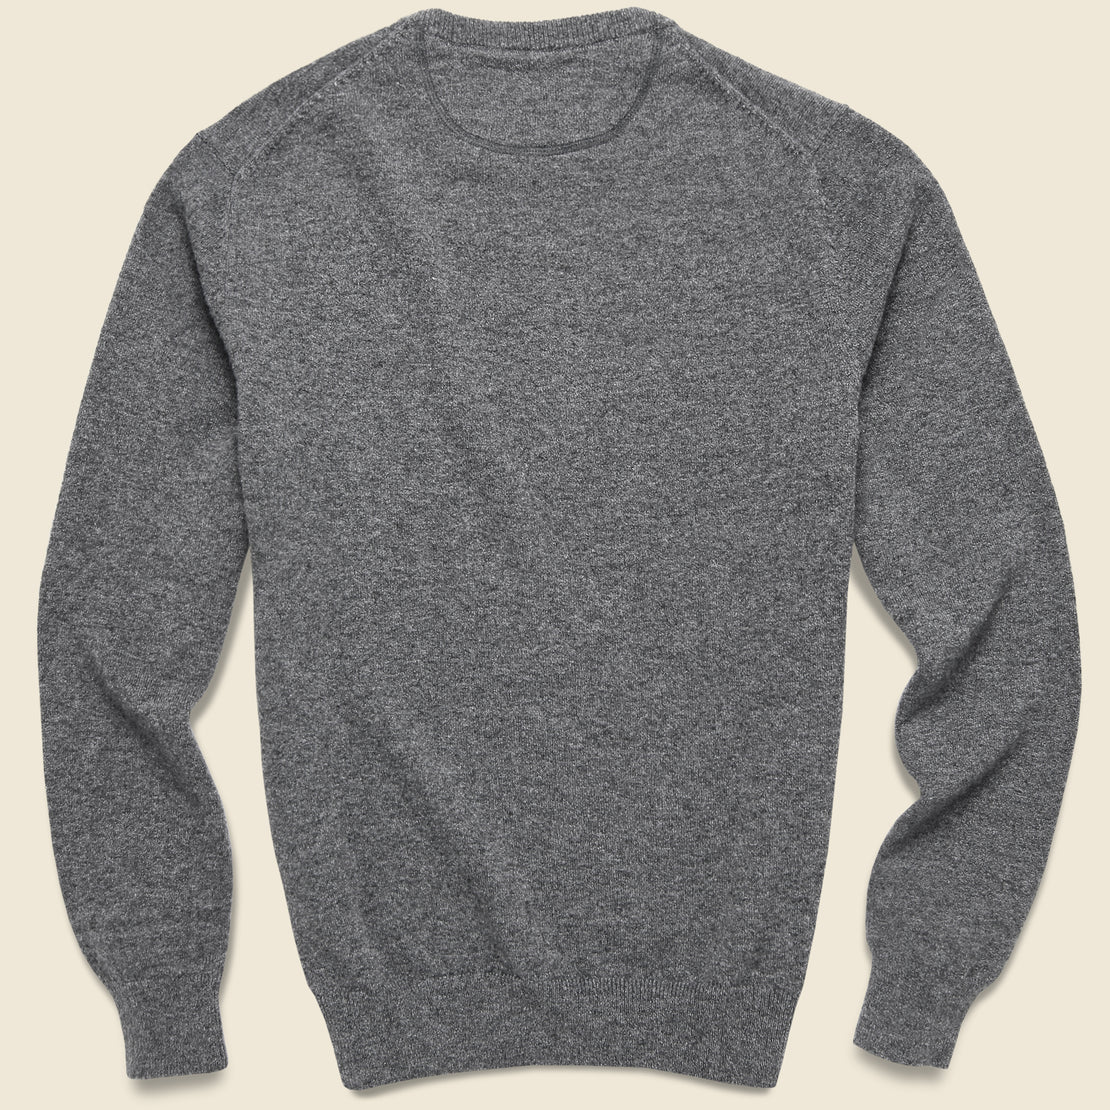 Jackson Crew Sweater - Grey Heather - Faherty - STAG Provisions - Tops - Sweater